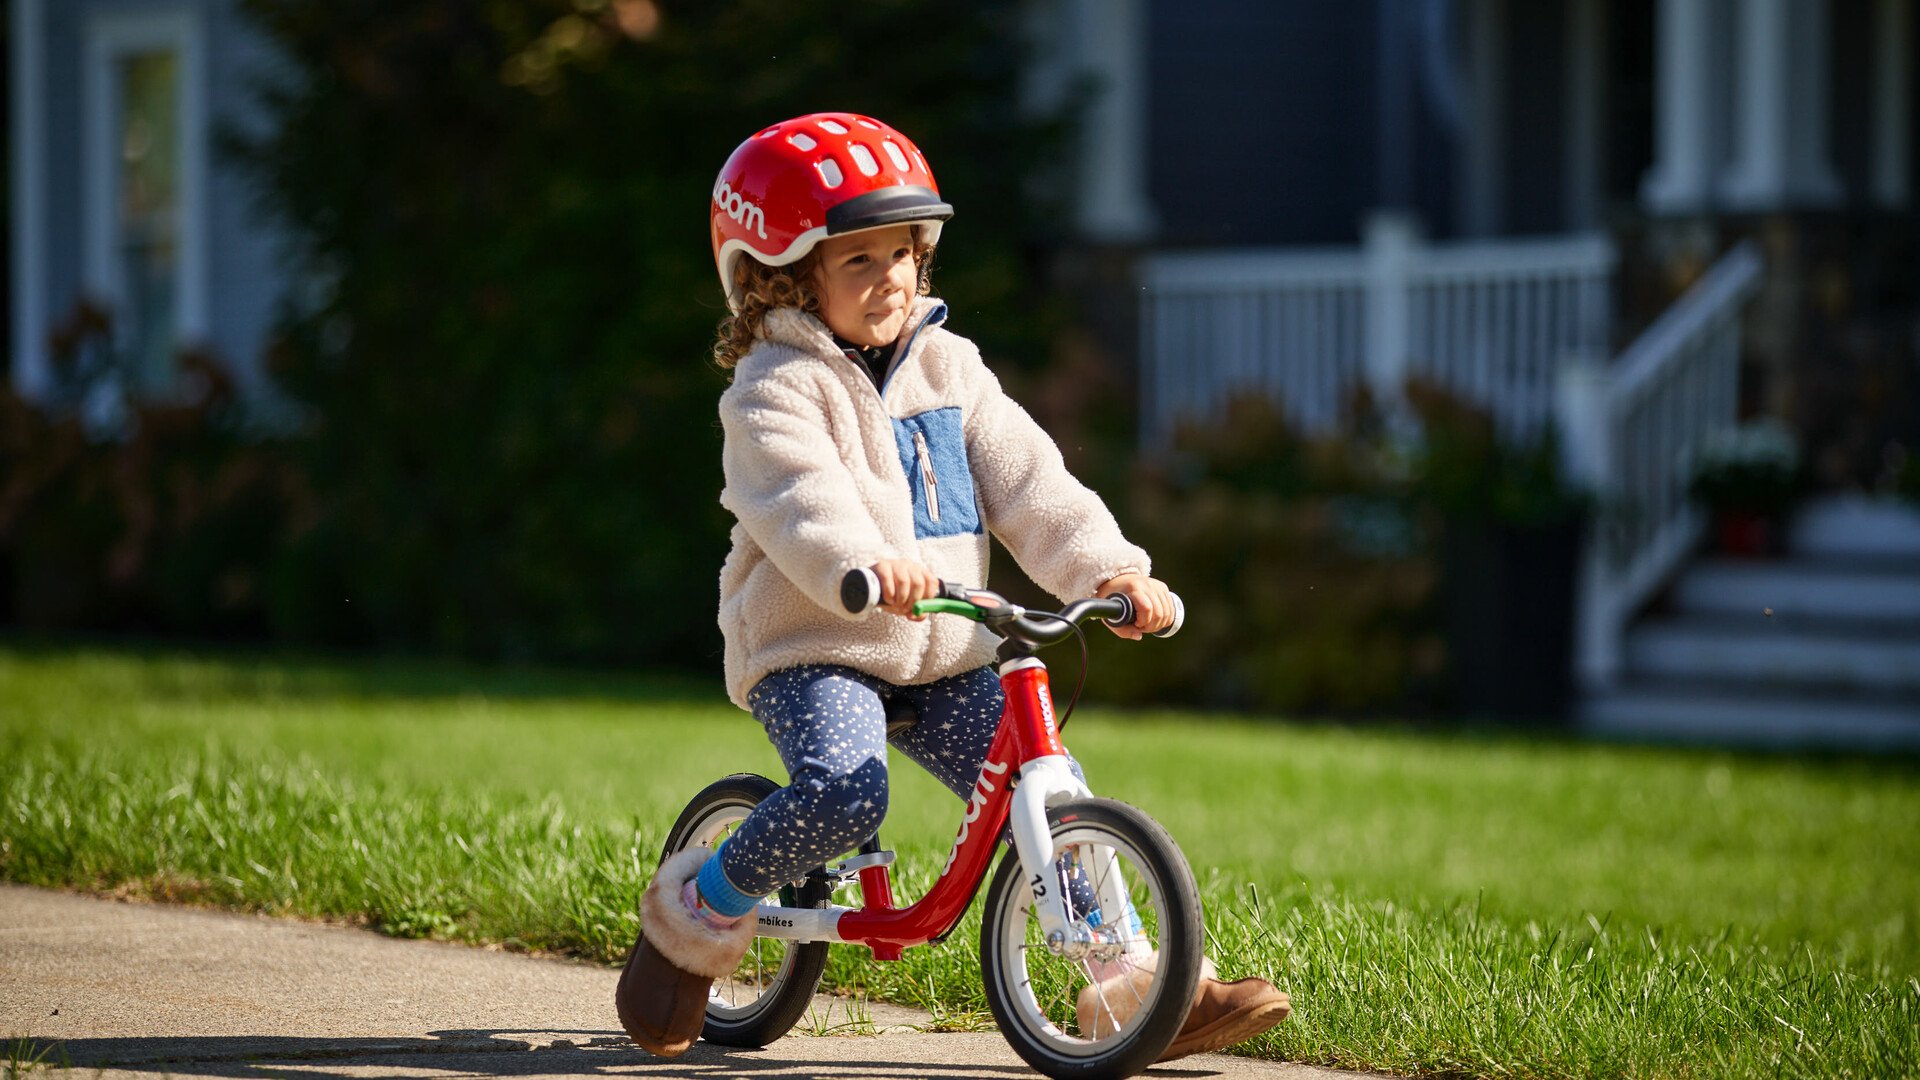 A smiling toddler rides along the pavement on a red woom bike with a red helmet from the brand woom